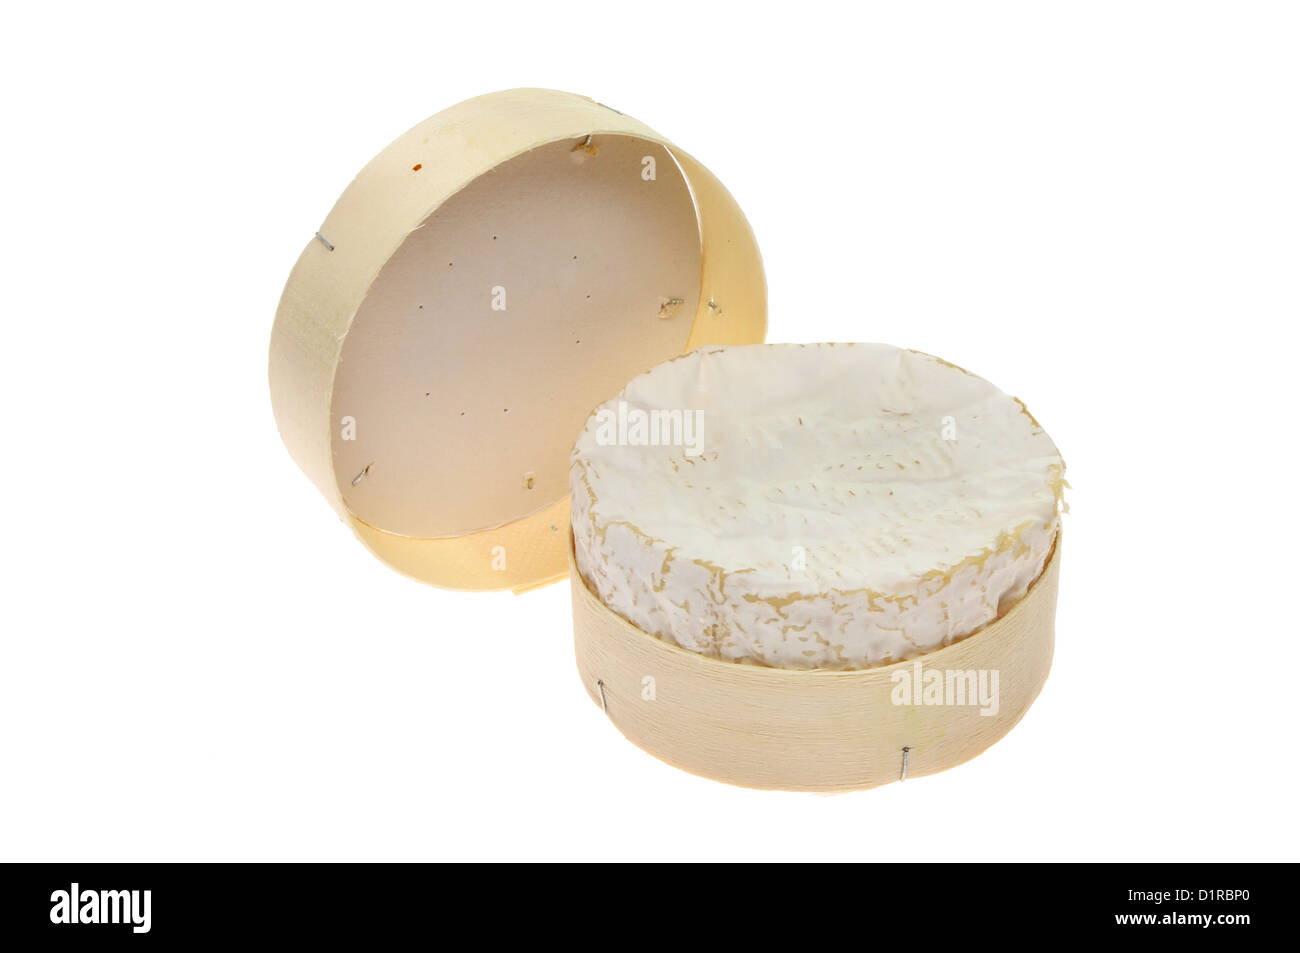 Camembert cheese and packaging isolated against white Stock Photo